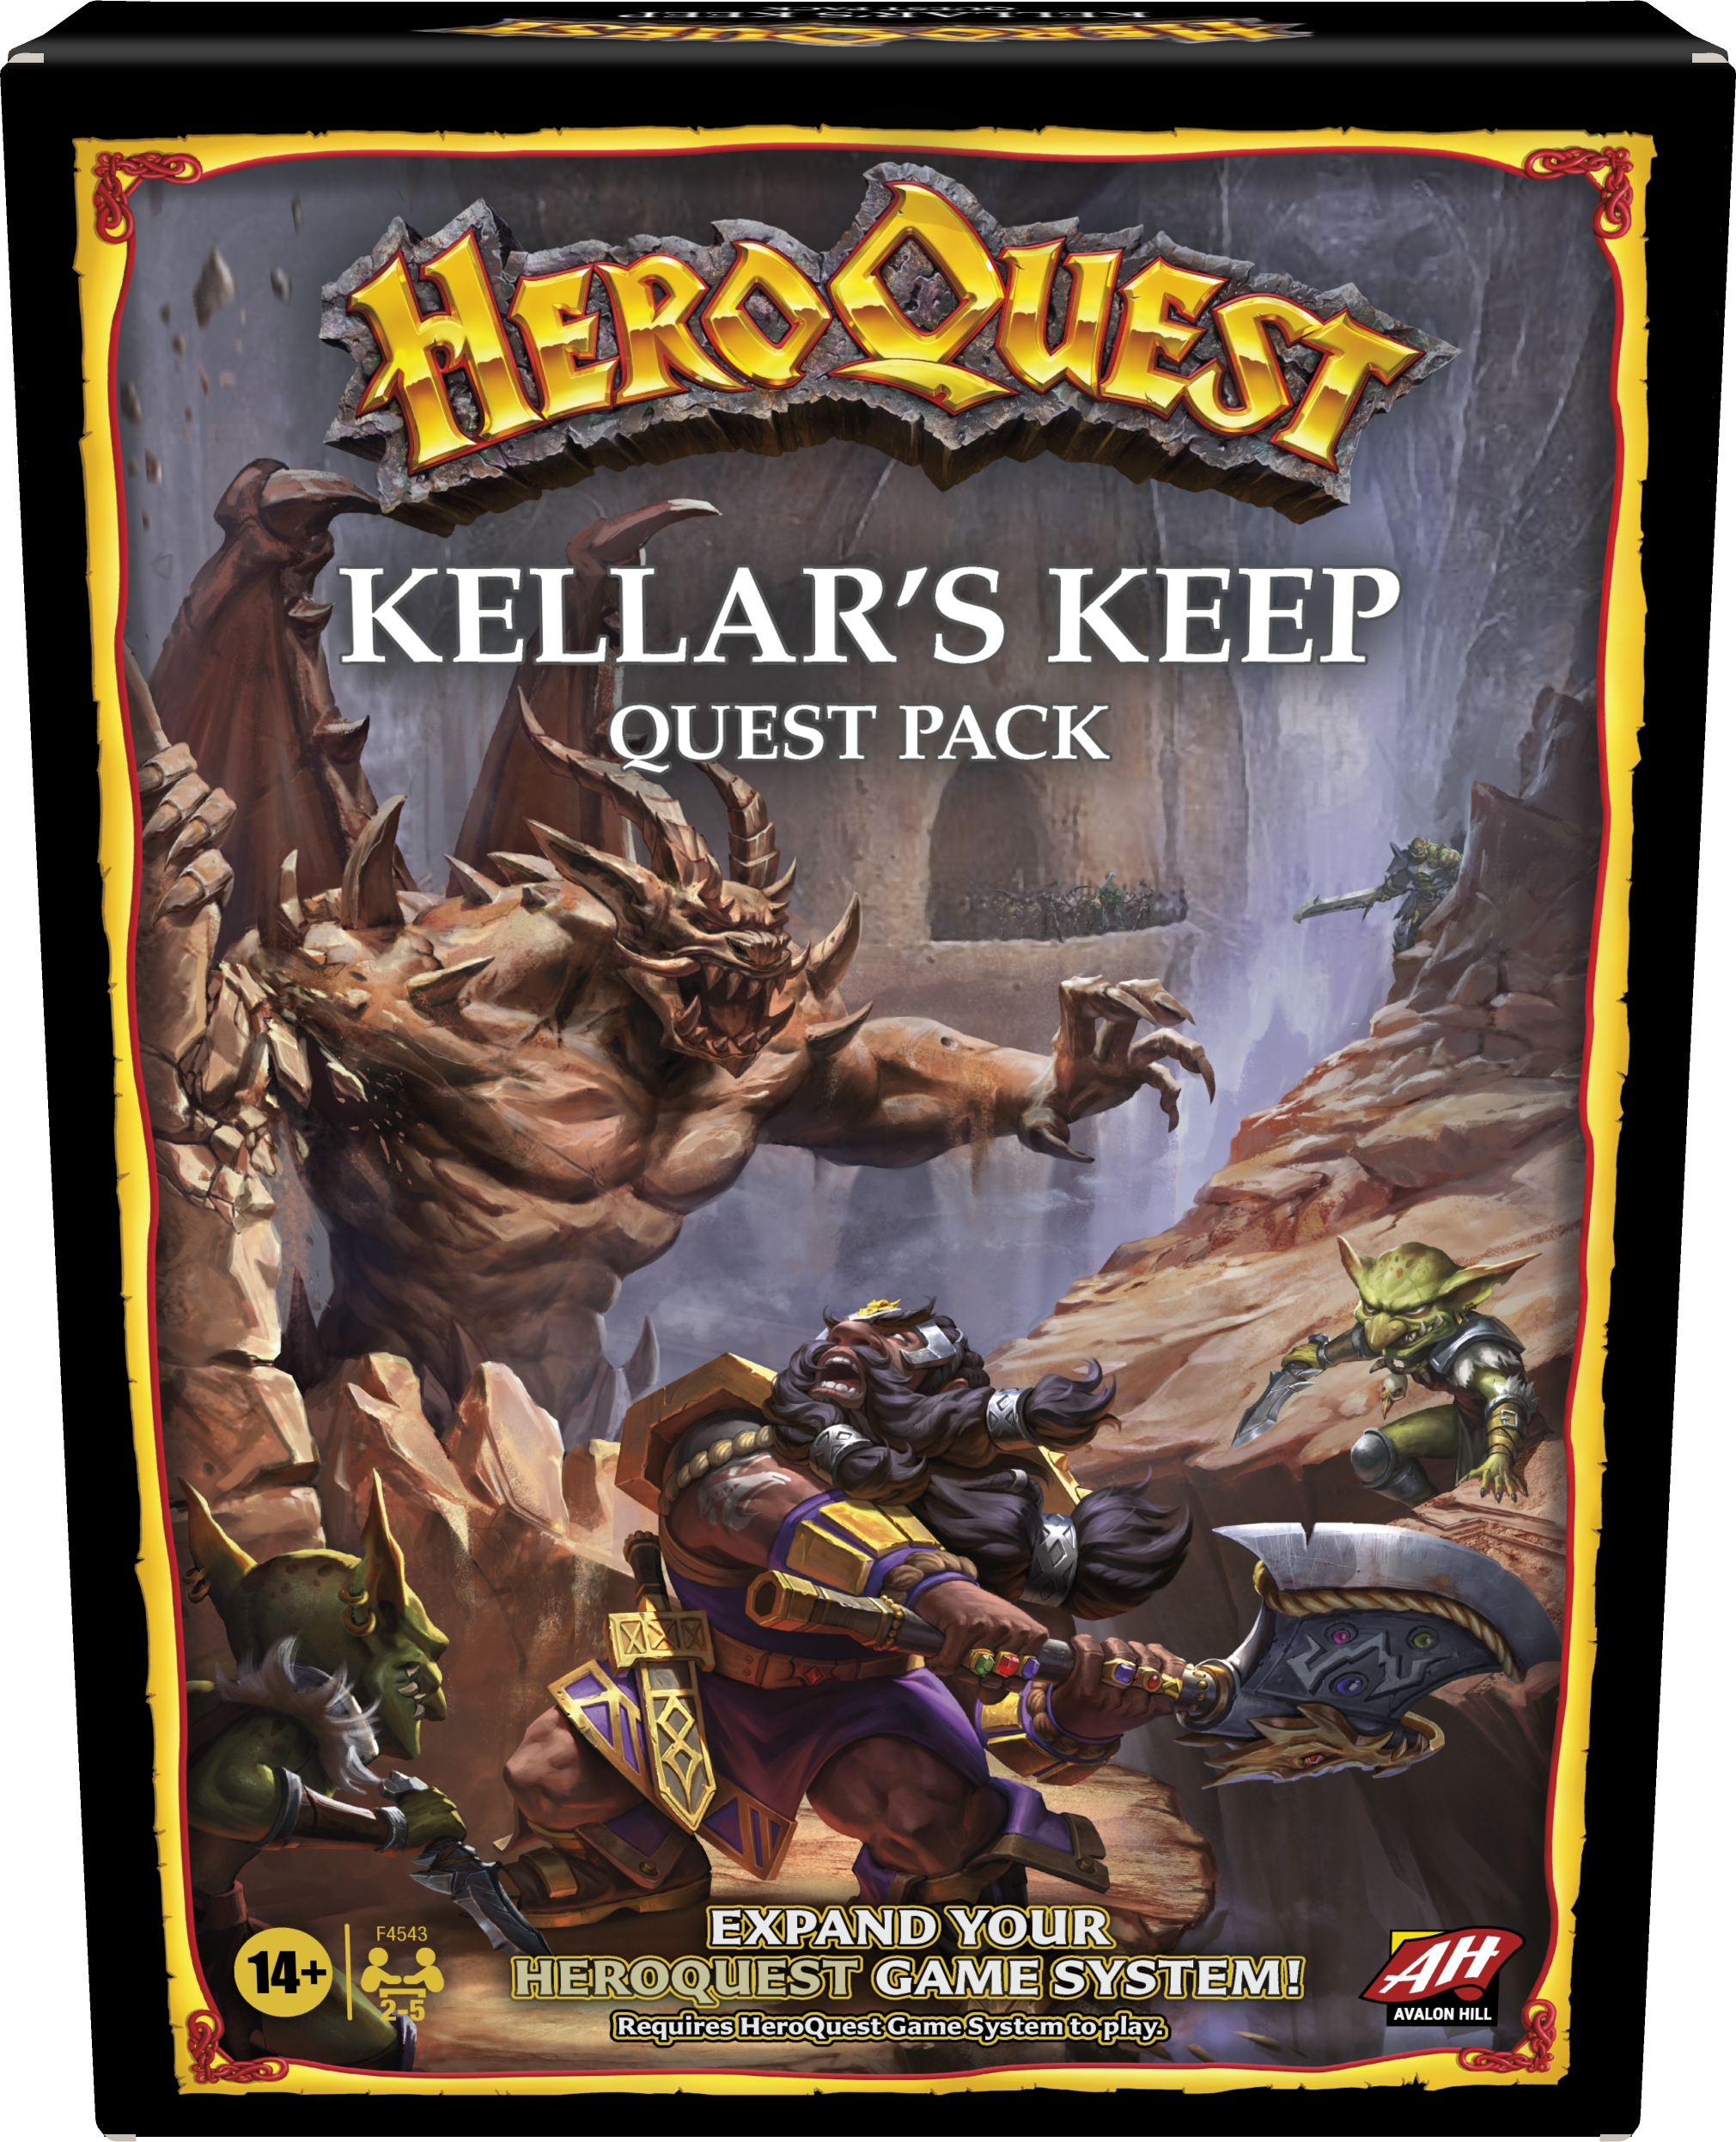 Avalon Hill Heroquest Kellar's Keep Expansion Quest Pack